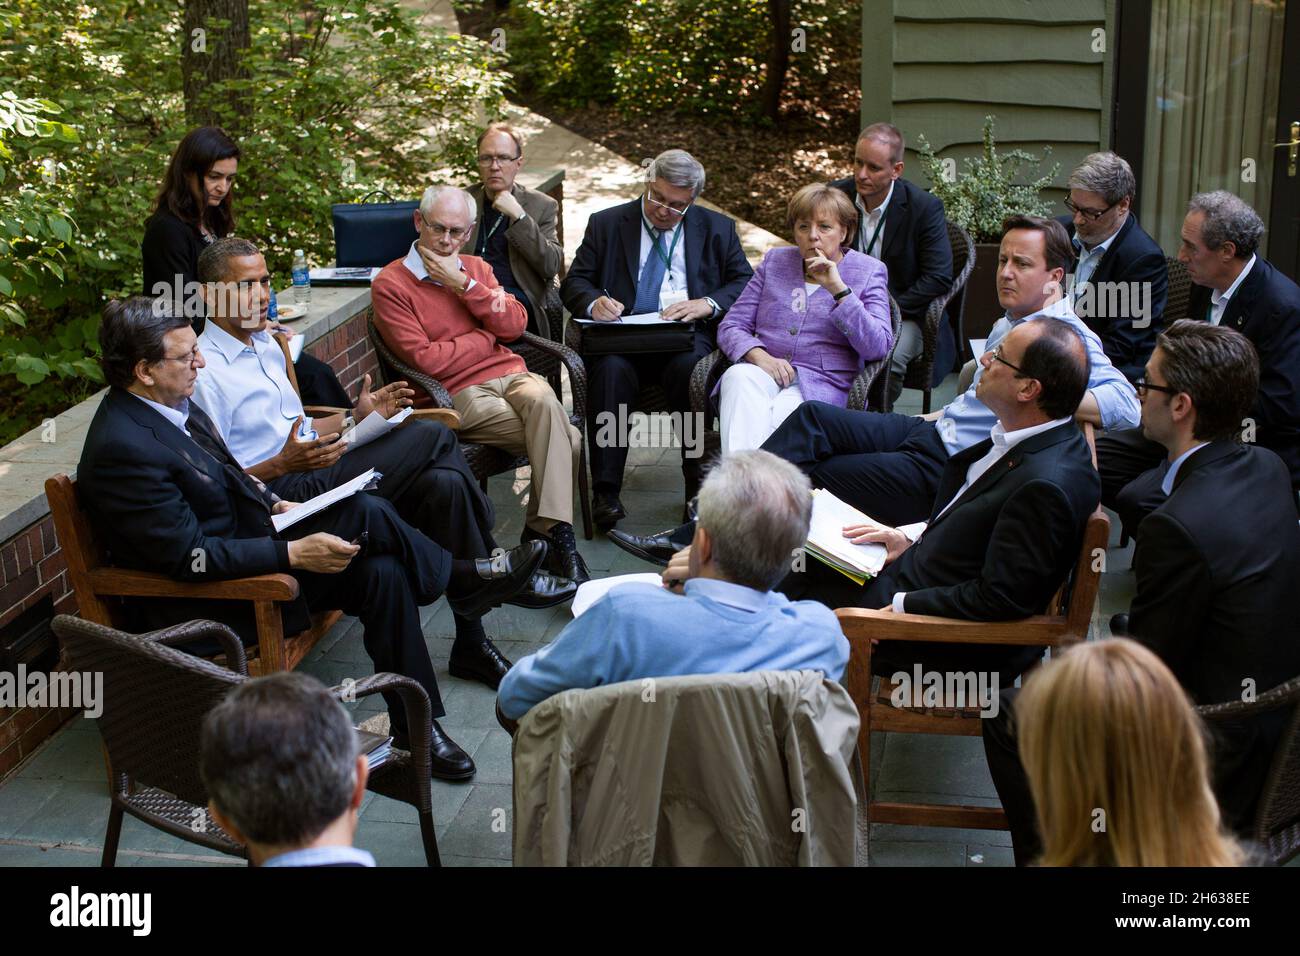 President Barack Obama meets with Eurozone leaders on the Laurel Cabin patio during the G8 Summit at Camp David, Md., May 19, 2012. Stock Photo